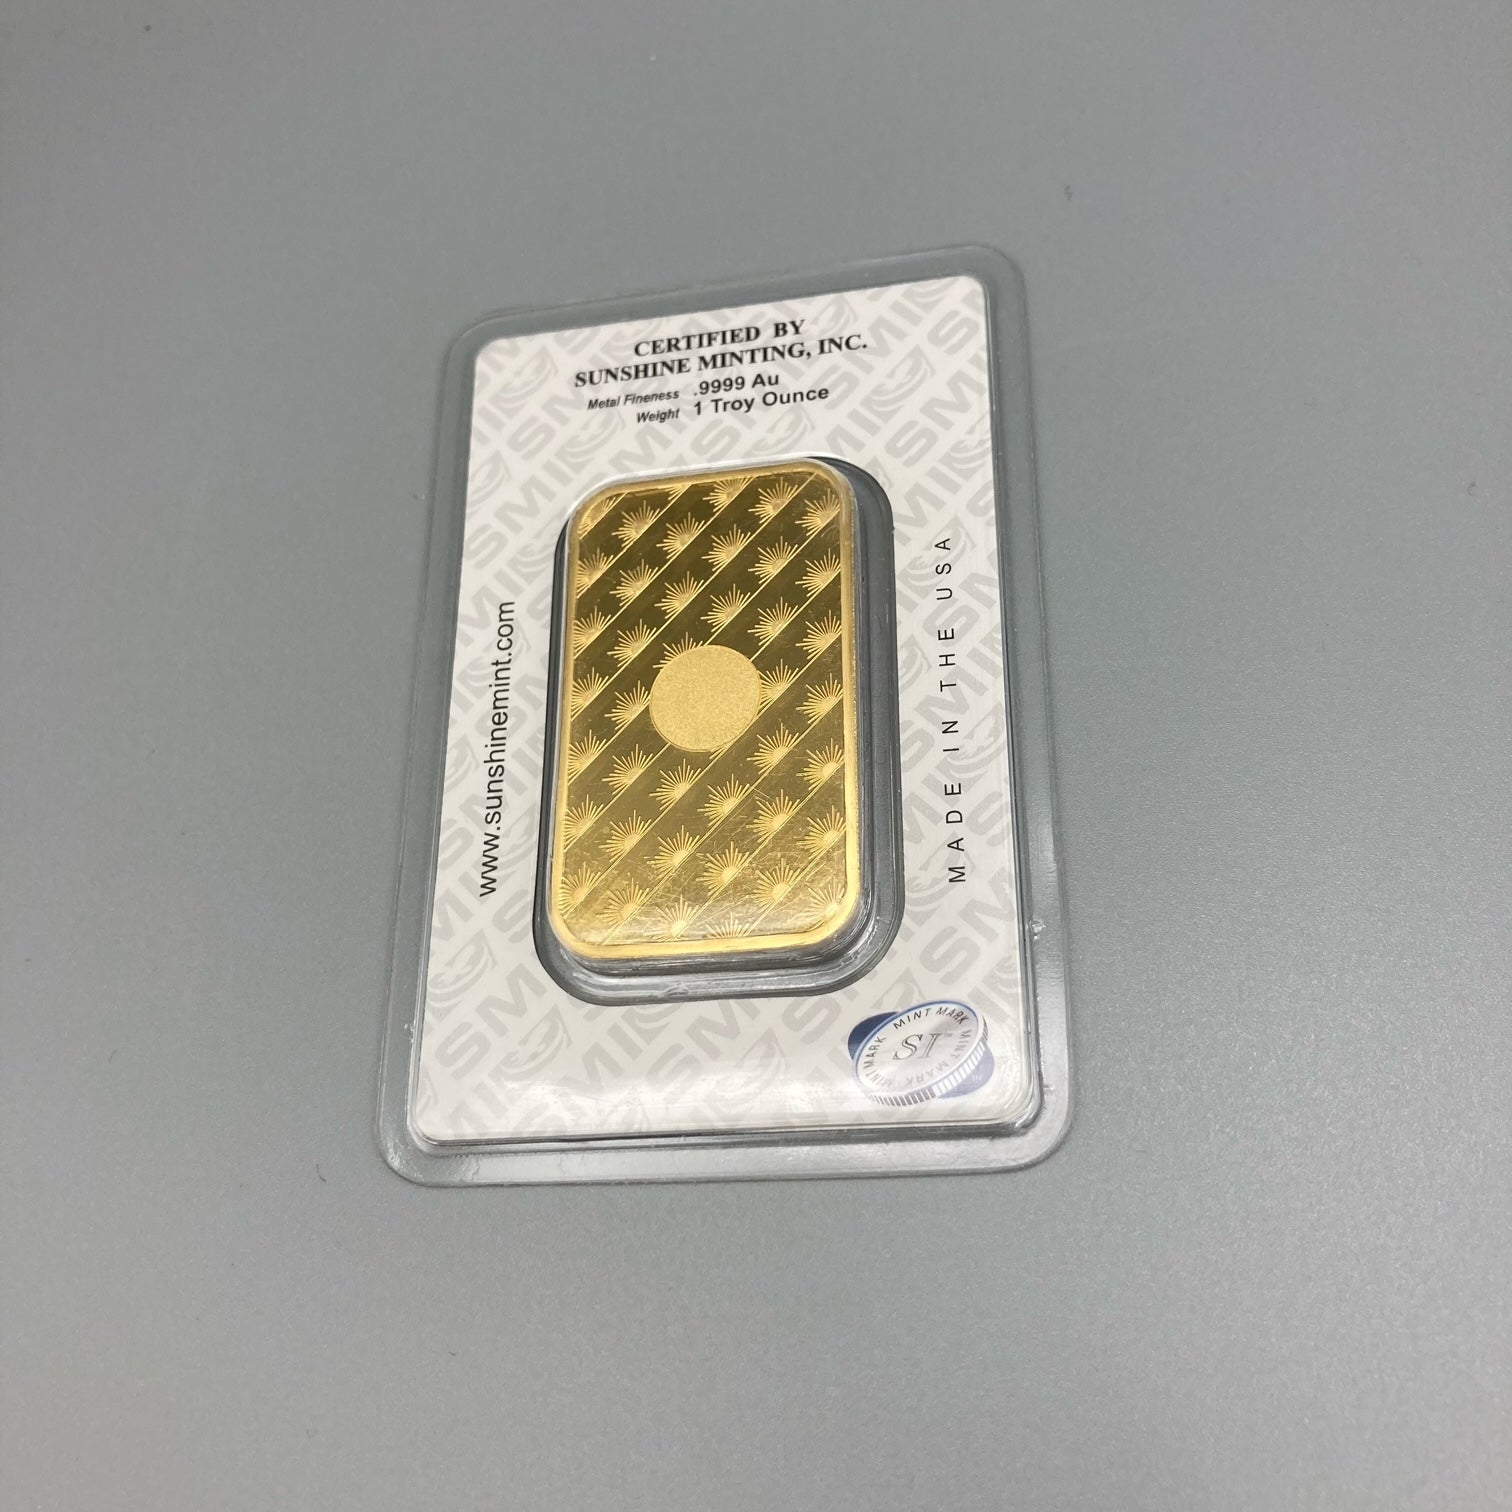 1 Troy Ounce Gold Bar | Sunshine Minting, Inc. .9999 Au PRICE ON REQUEST